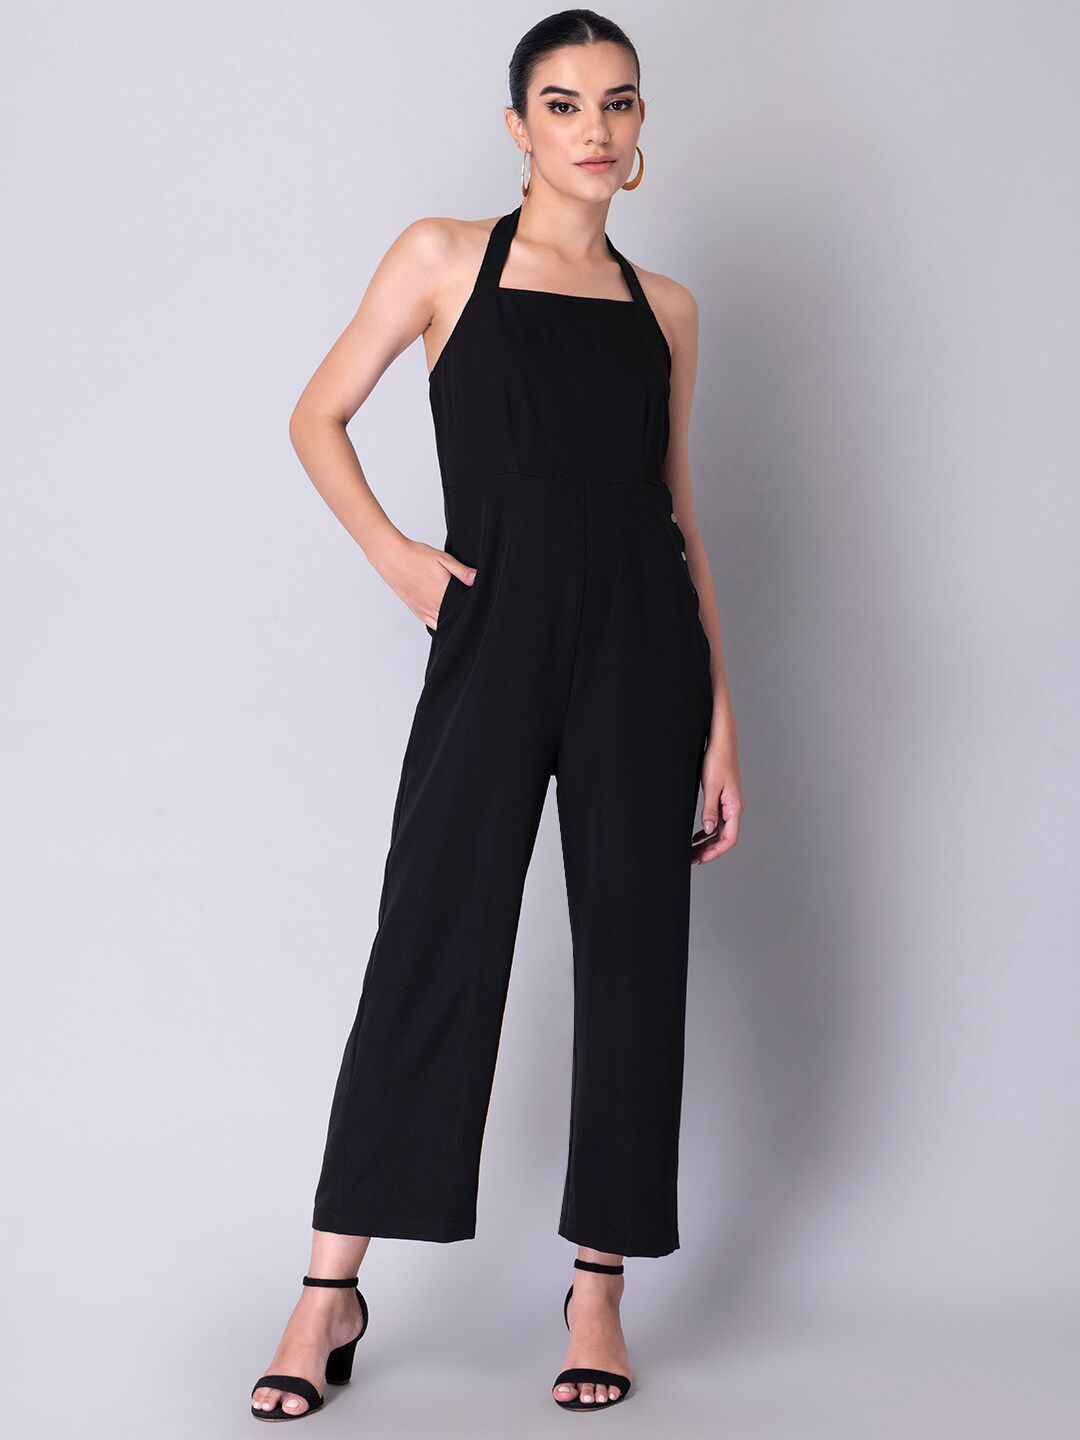 FabAlley Black Halter Neck Basic Jumpsuit Price in India